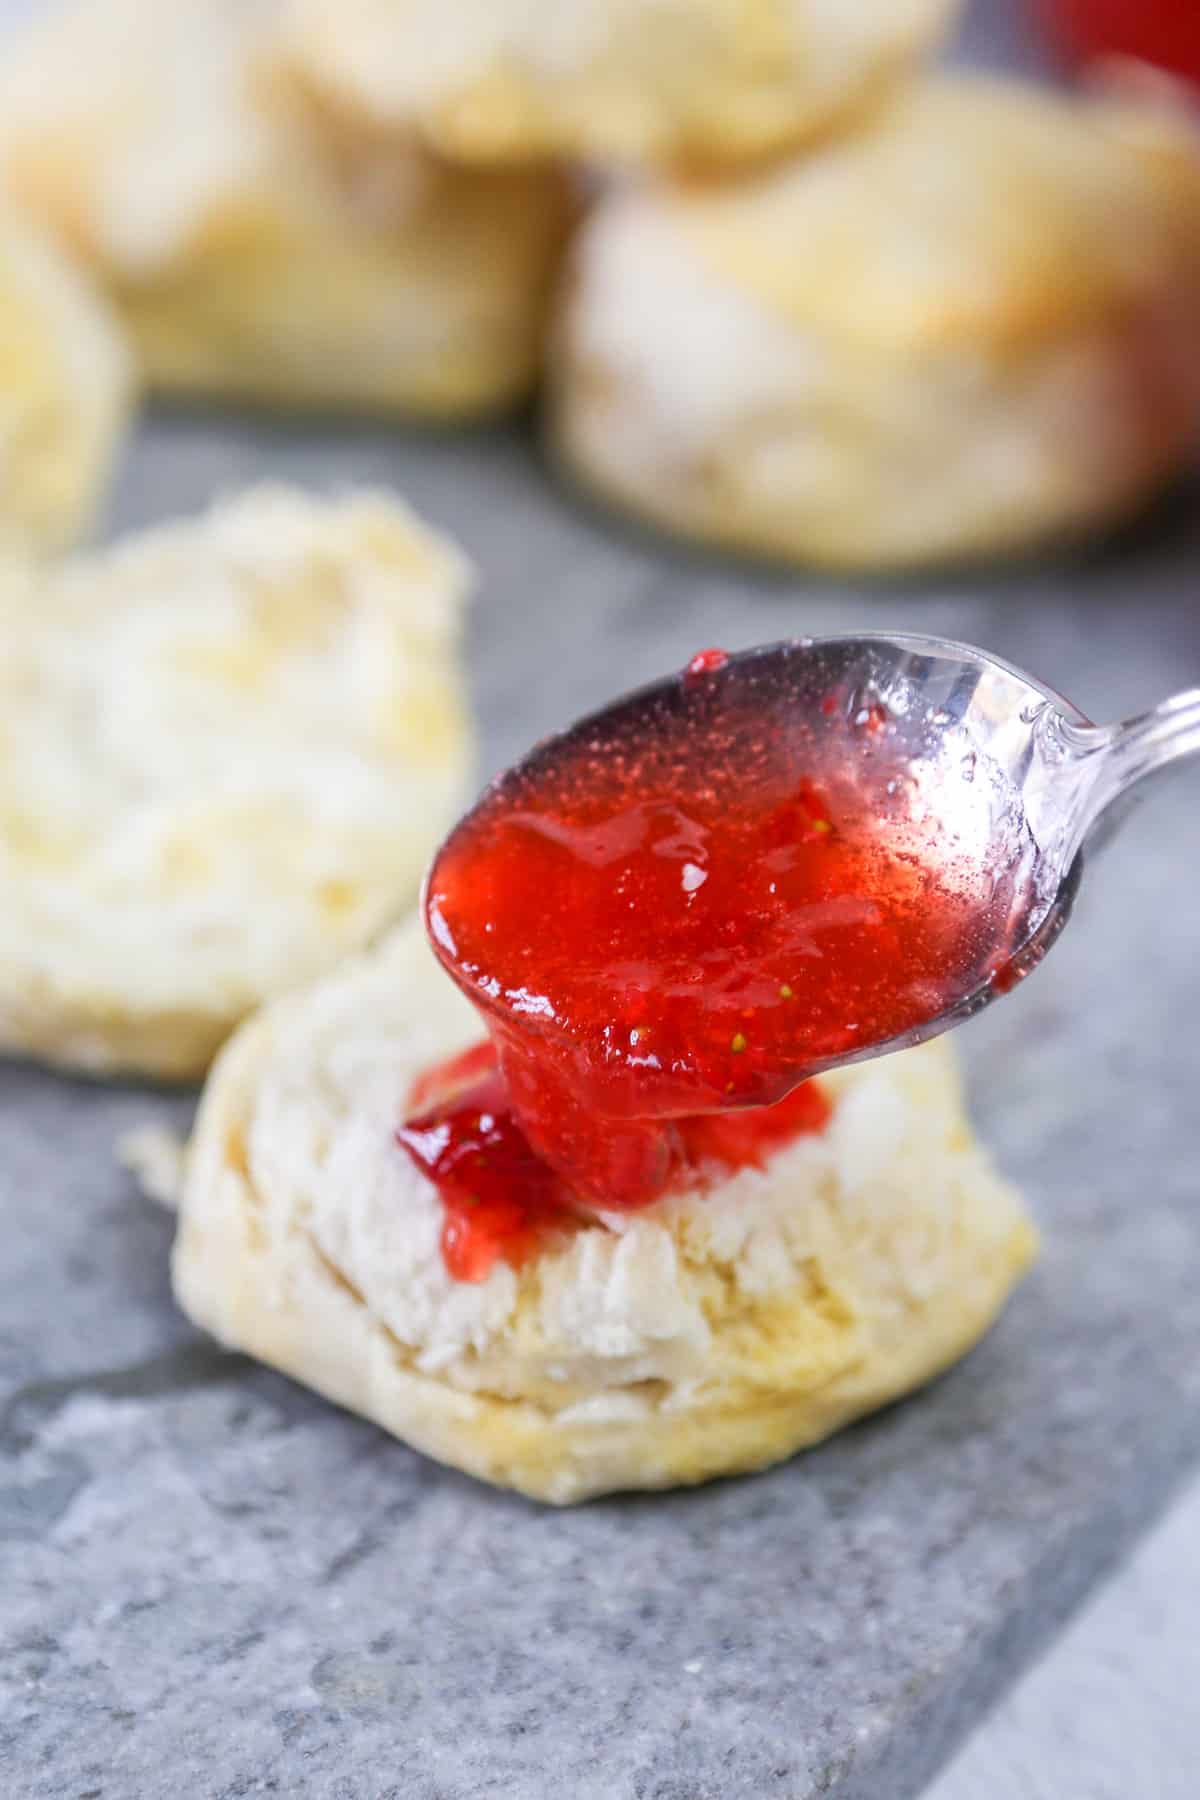 A spoon scooping strawberry freezer jam onto half a biscuit.